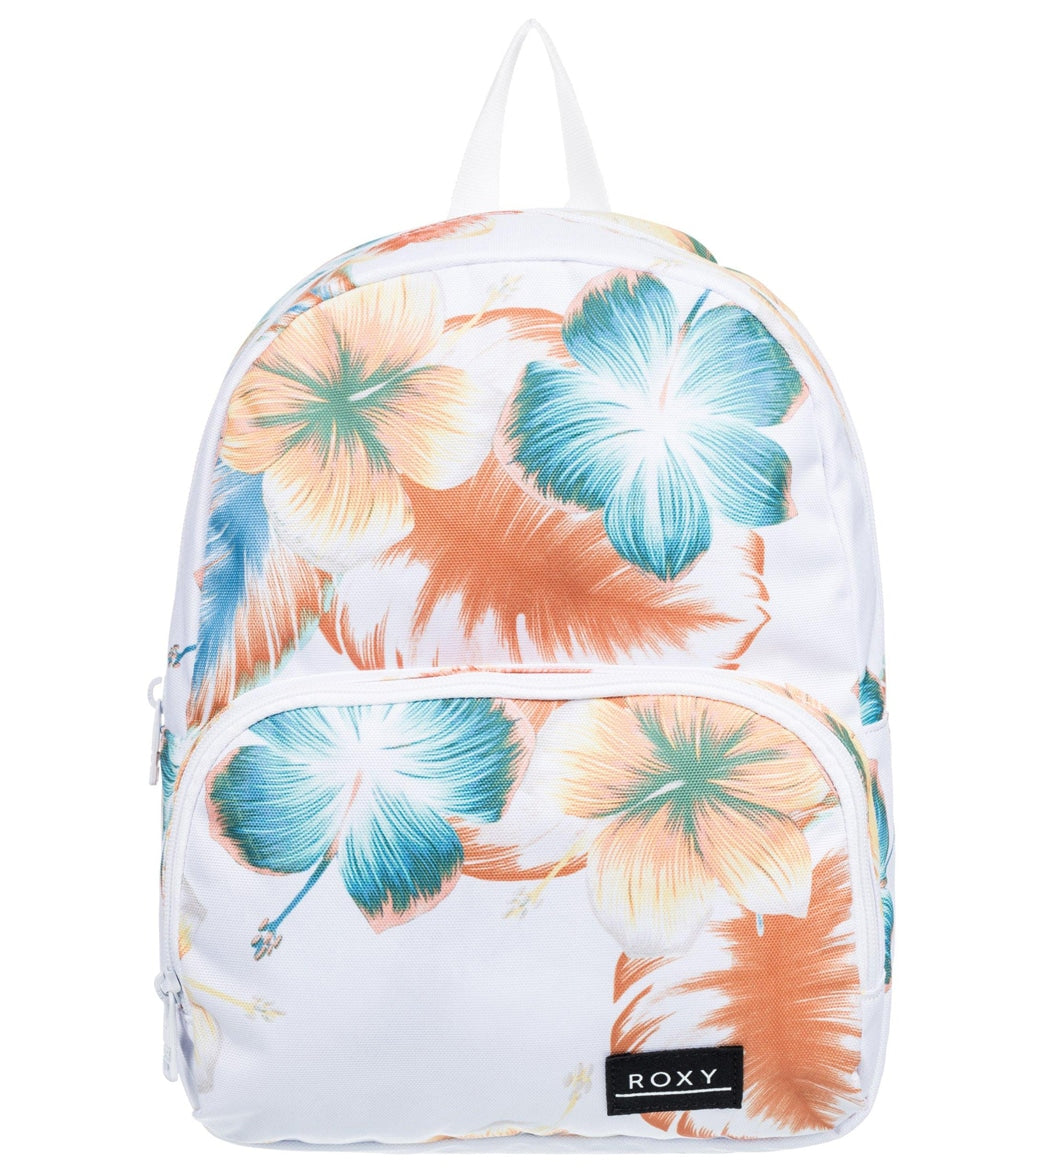 Roxy Women's Always Core Printed Mini Backpack - Bright White Reef Flower Small One Size - Swimoutlet.com